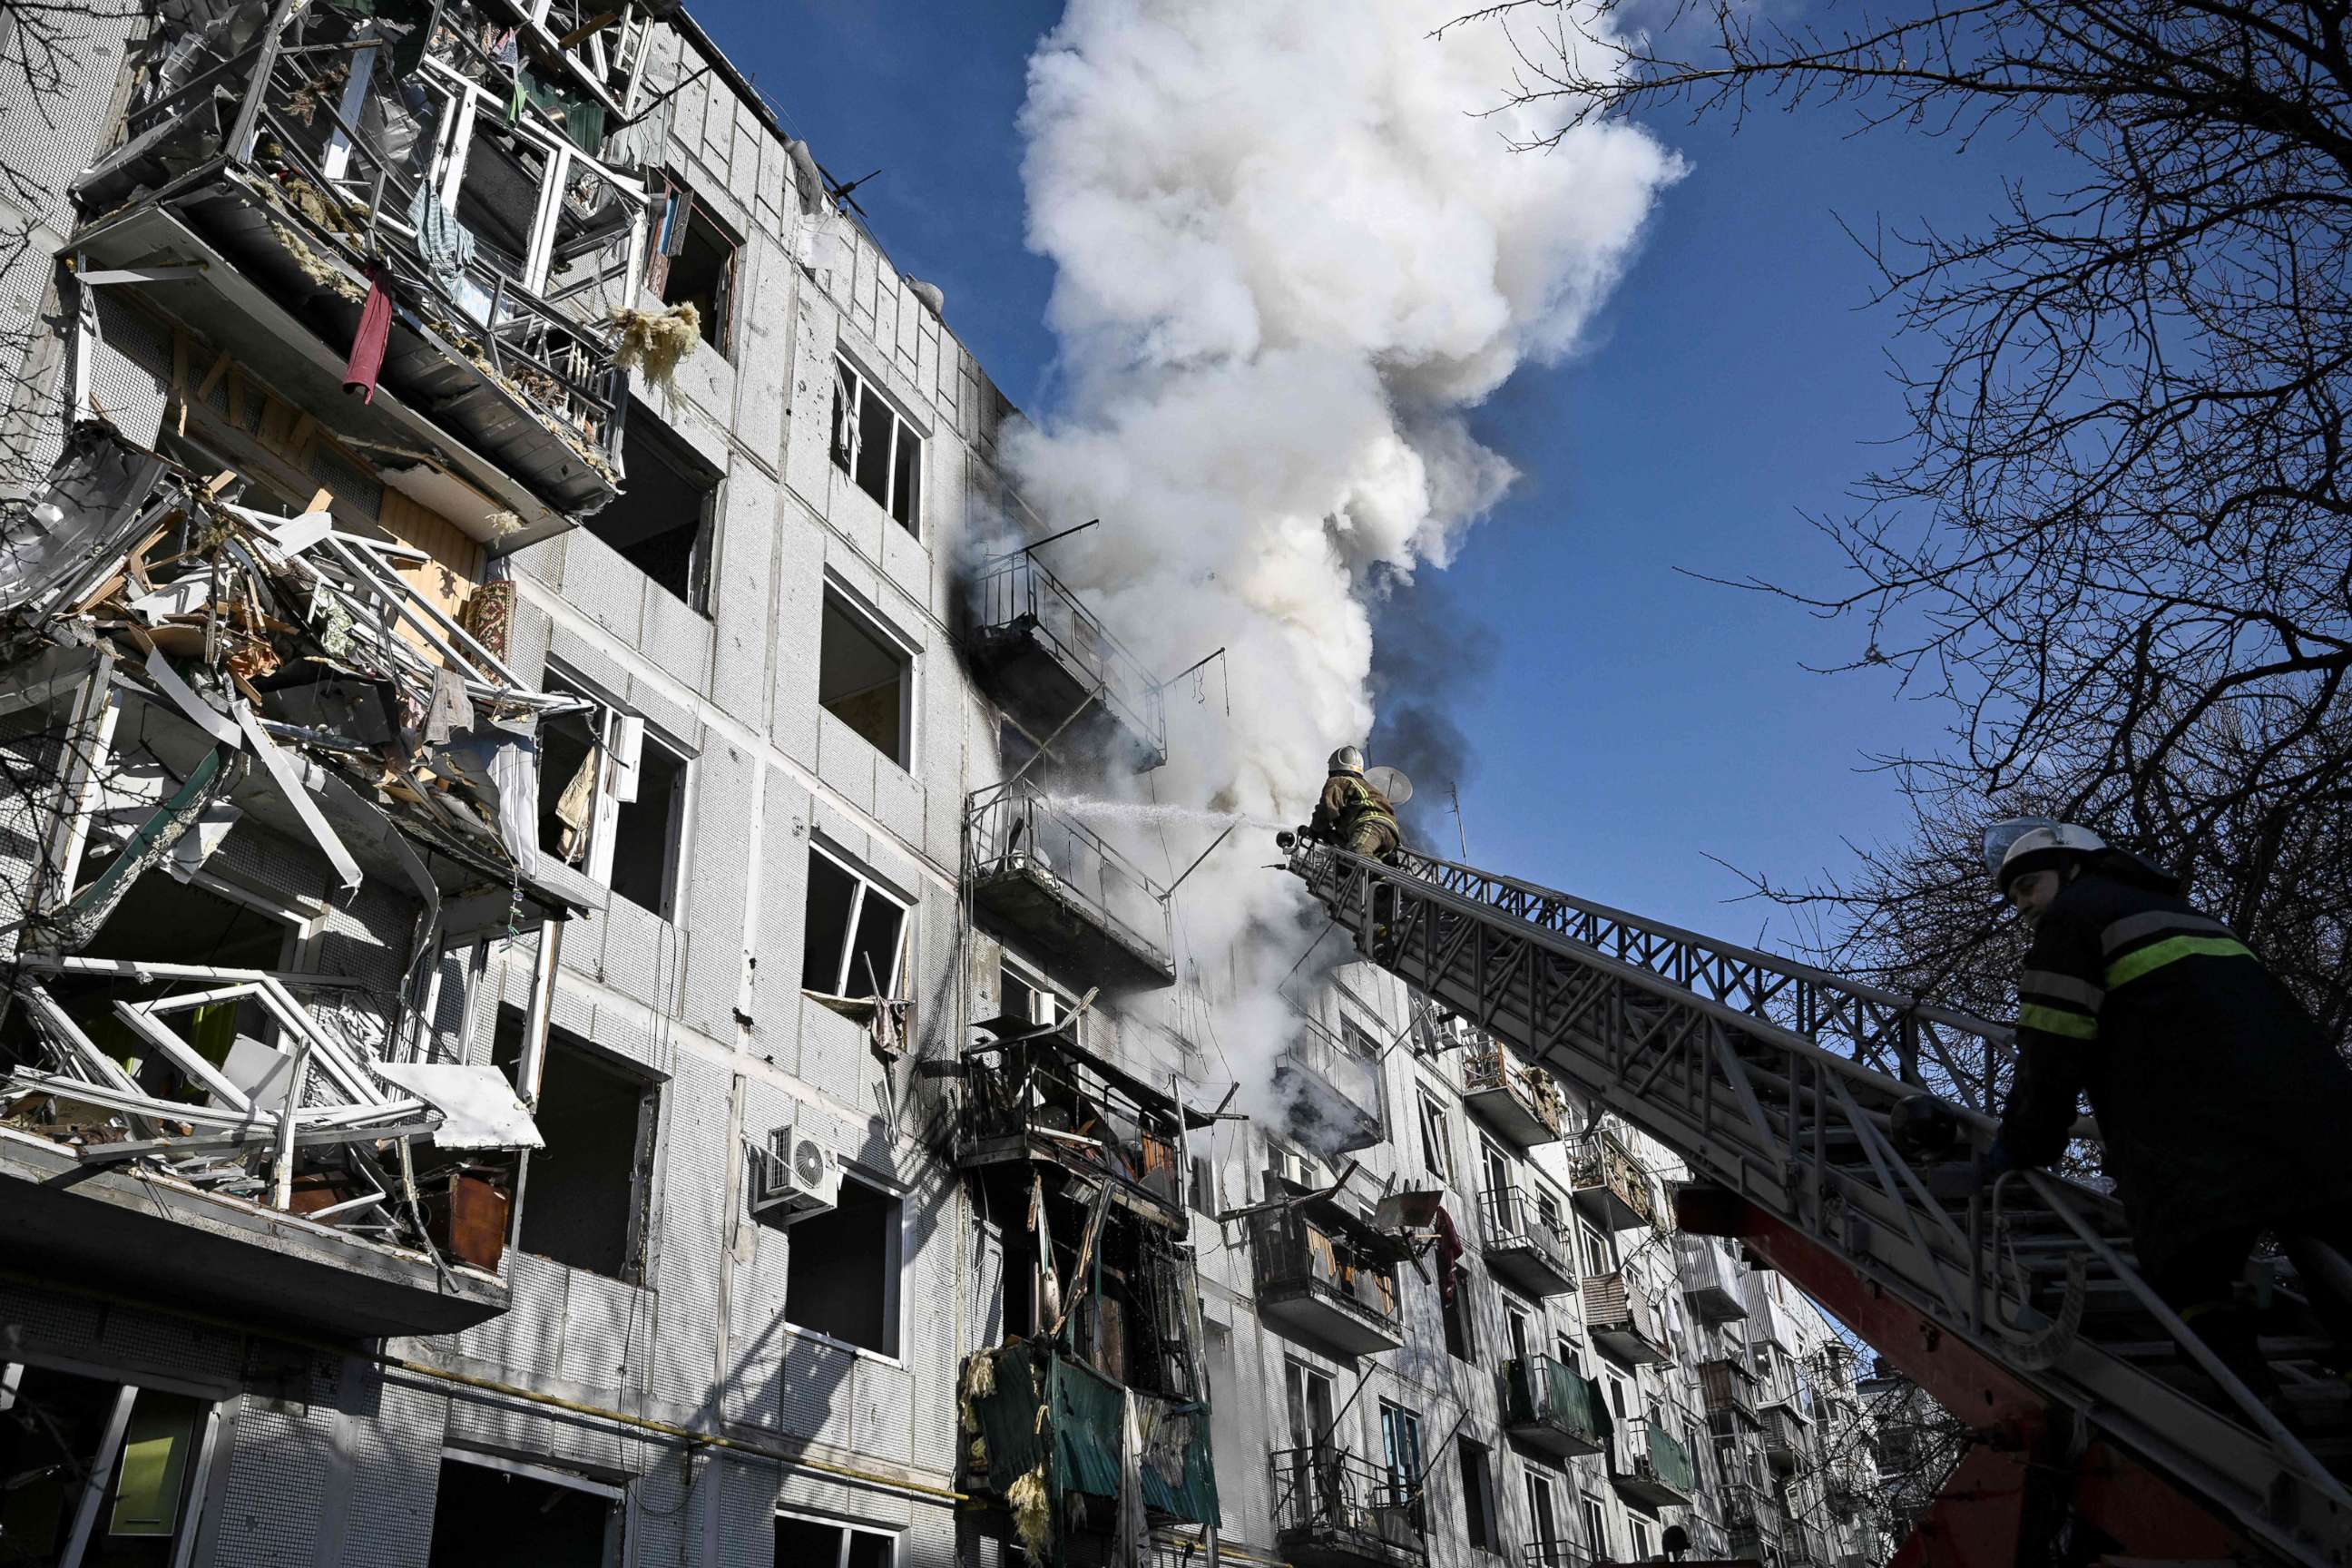 PHOTO: Firefighters attend to a fire in a building after bombings in the eastern Ukraine town of Chuguiv, eastern Ukraine 25 miles from Kharkiv on Feb. 24, 2022.